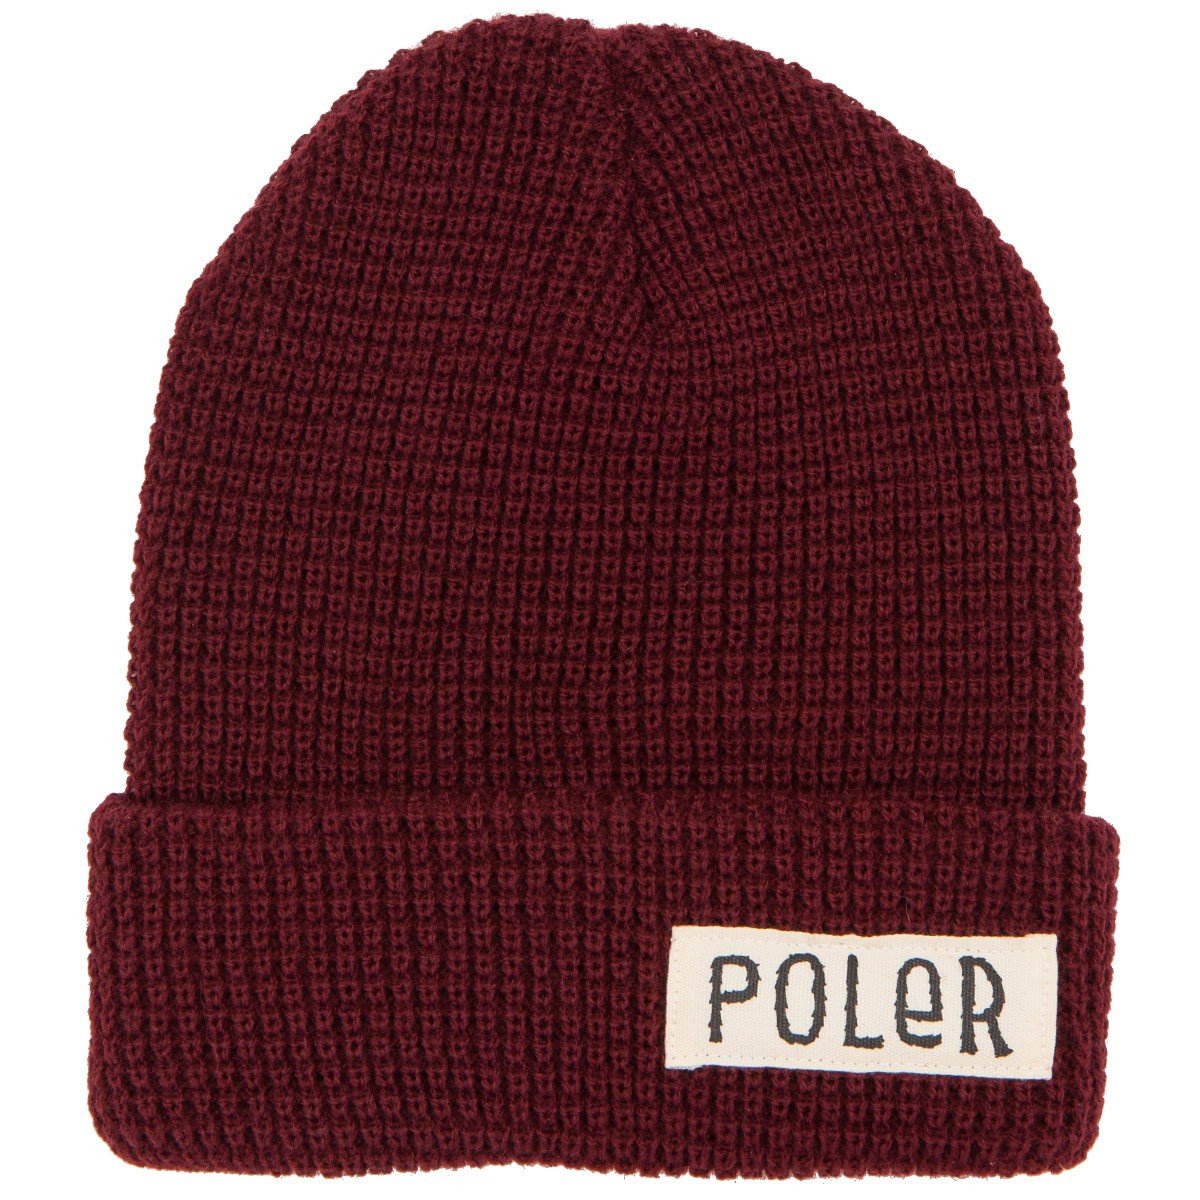 POLER WORKERMAN BEANIE // BURGUNDY-The Collateral